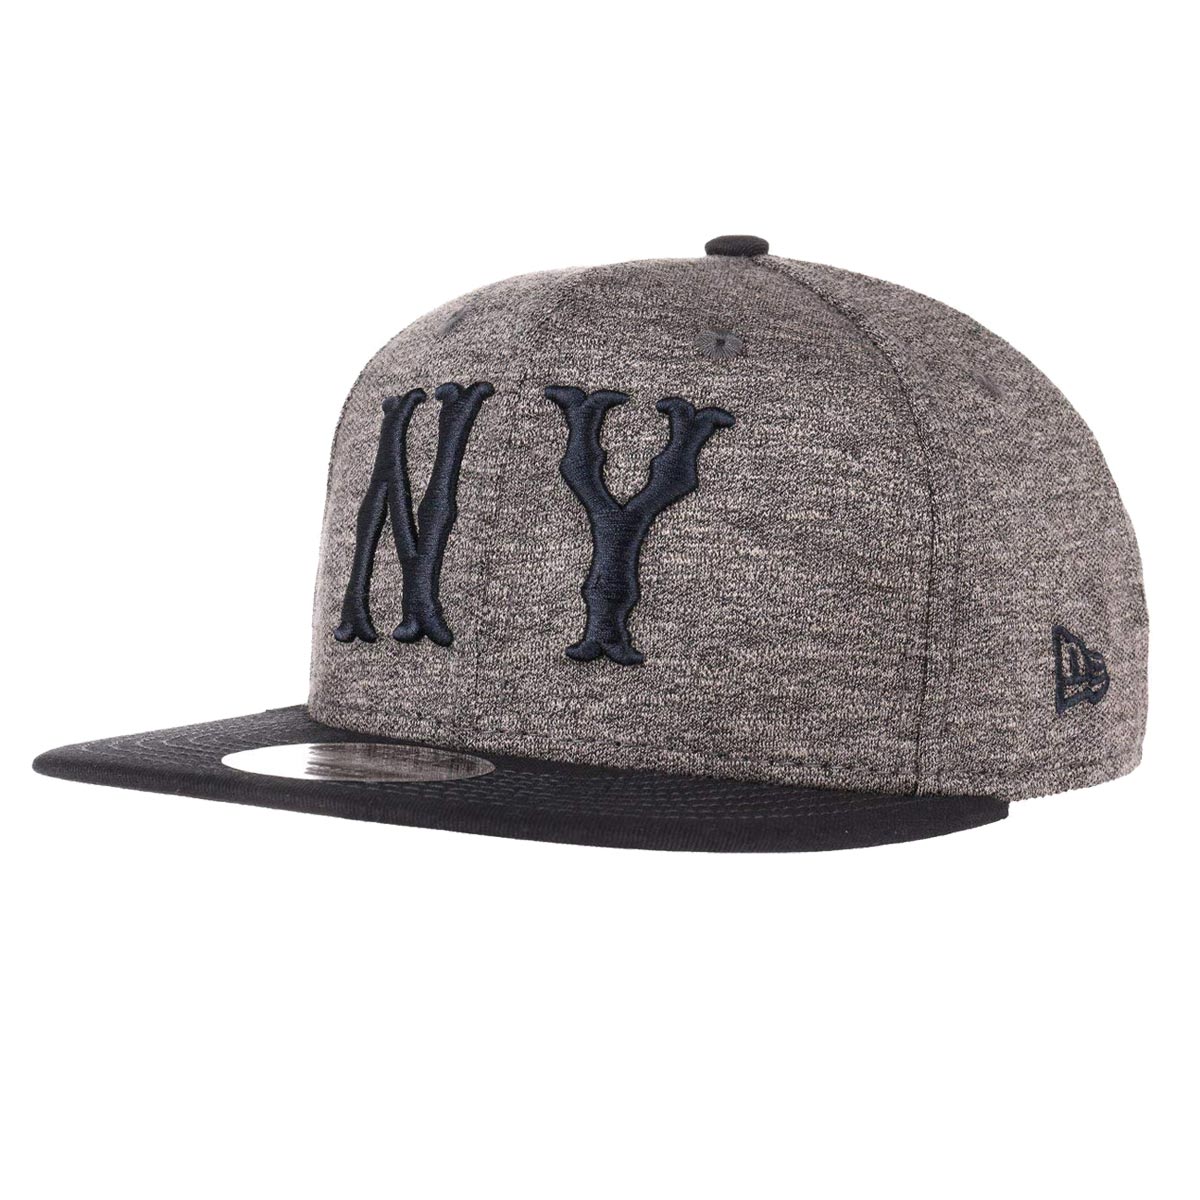 JERSEY MIX 9FIFTY NEYHIGCO 9FIFTY imagine noua